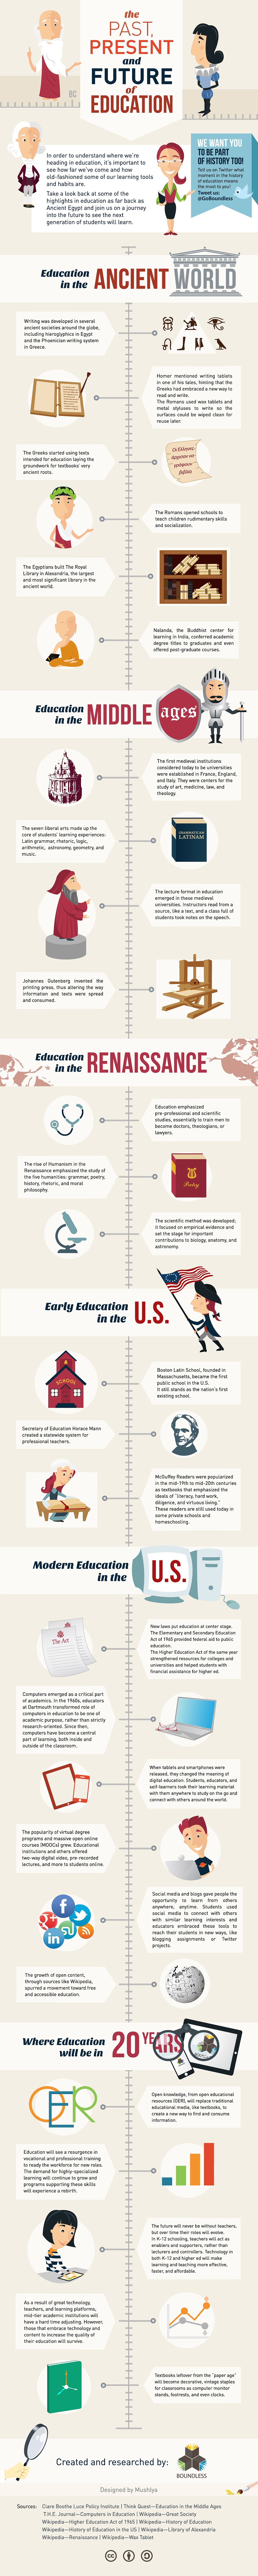 The History of Education Infographic